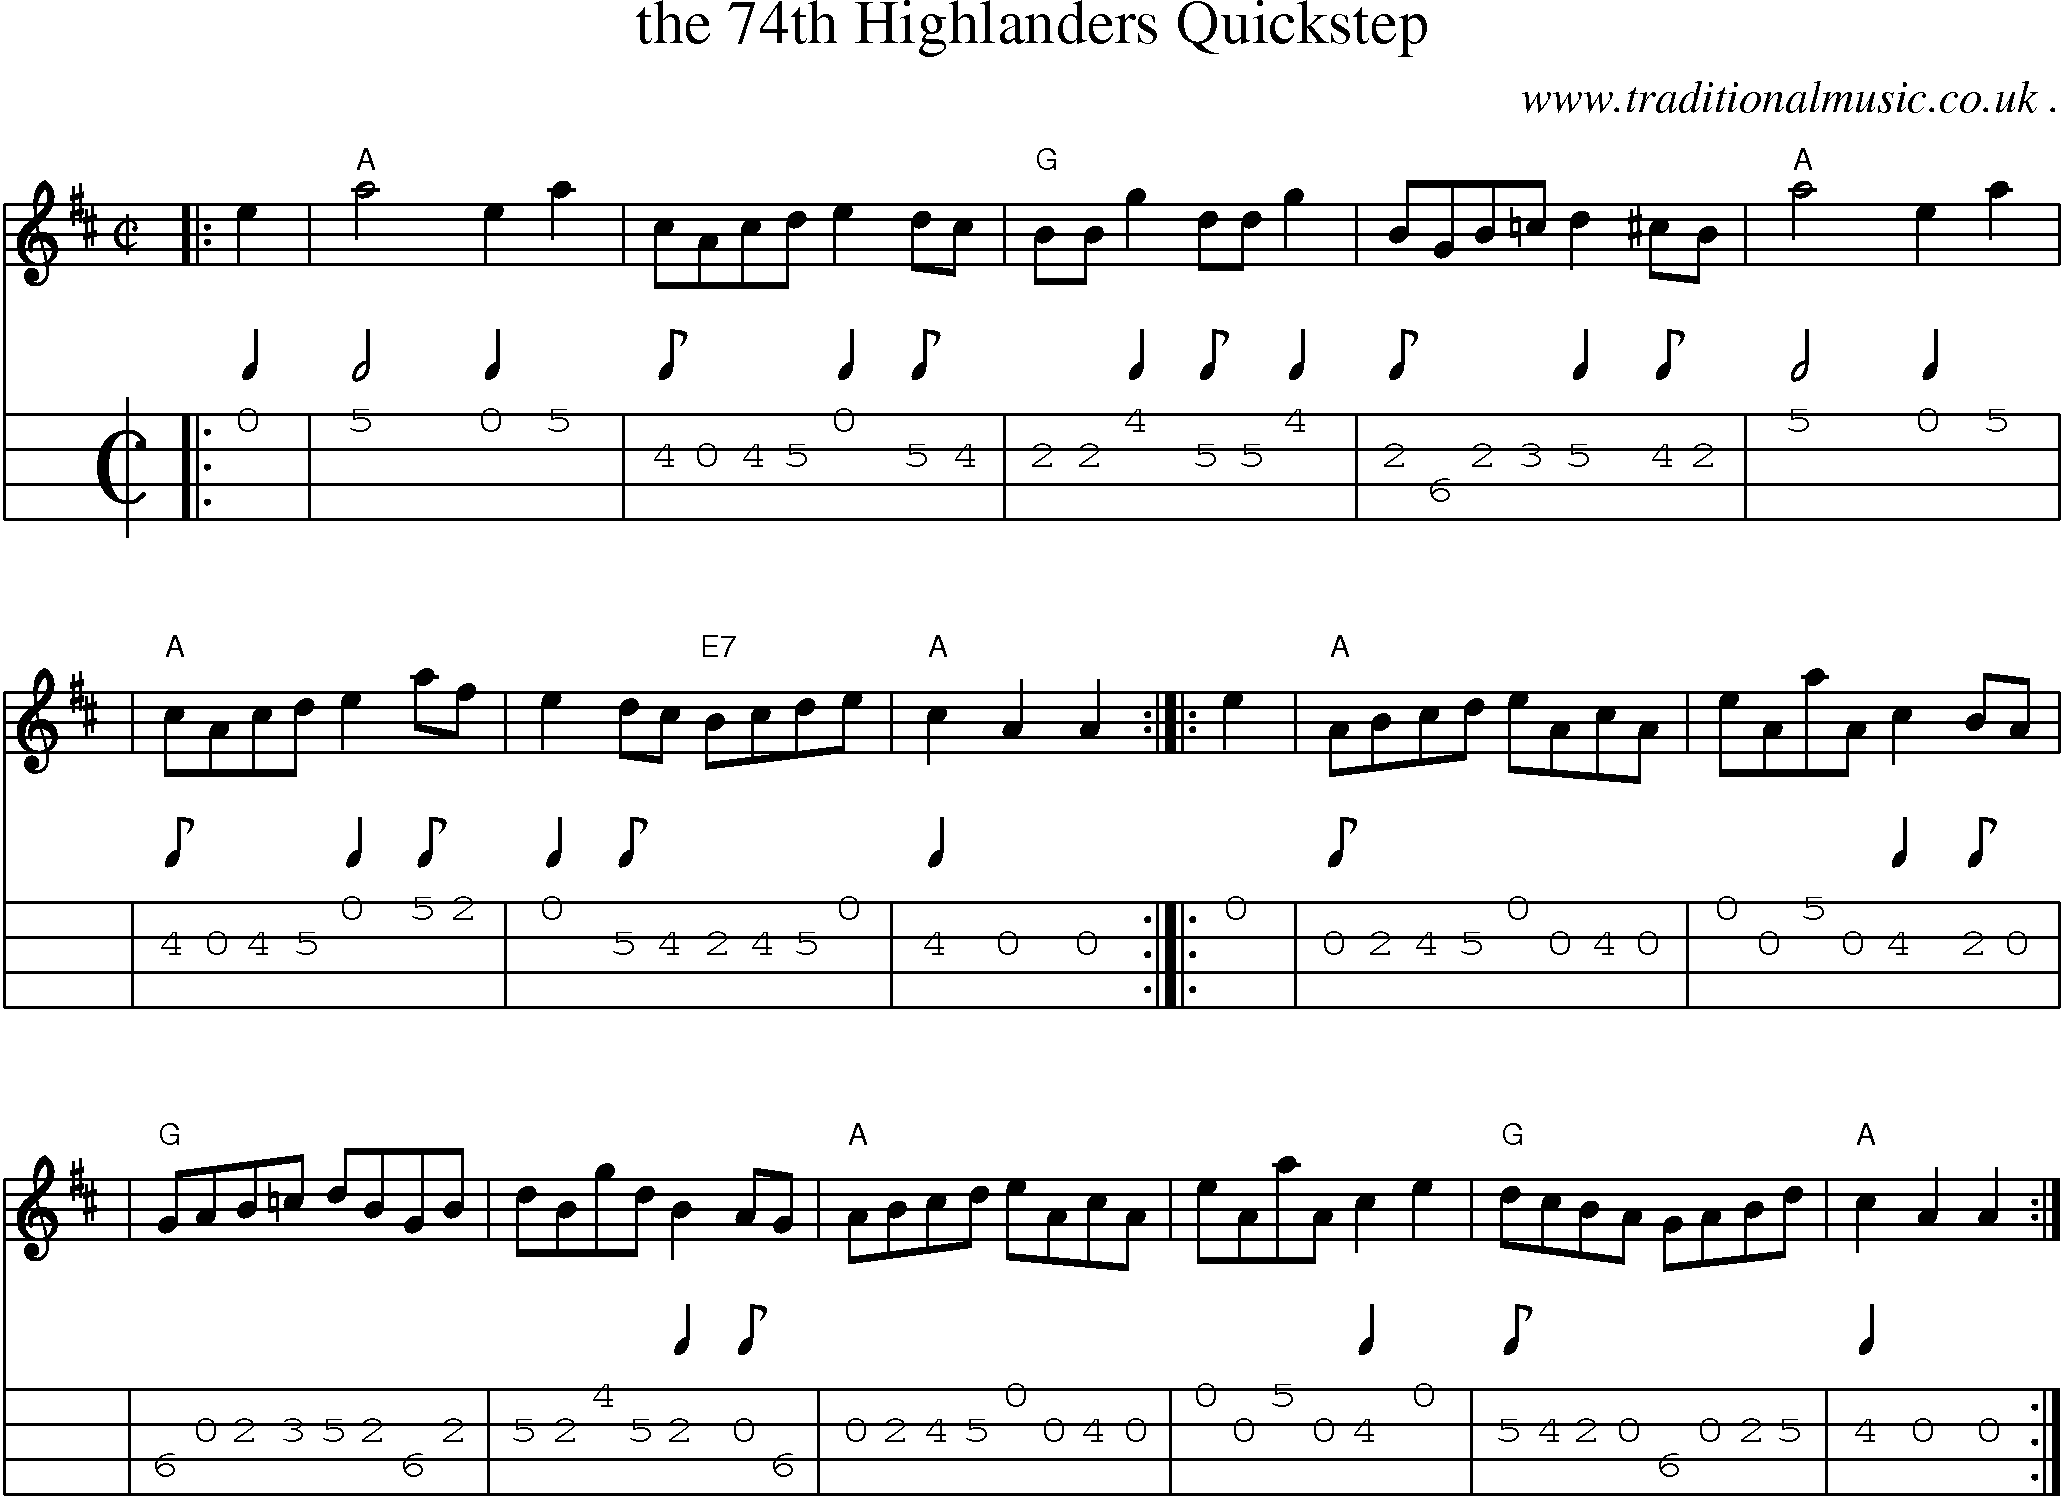 Sheet-music  score, Chords and Mandolin Tabs for The 74th Highlanders Quickstep